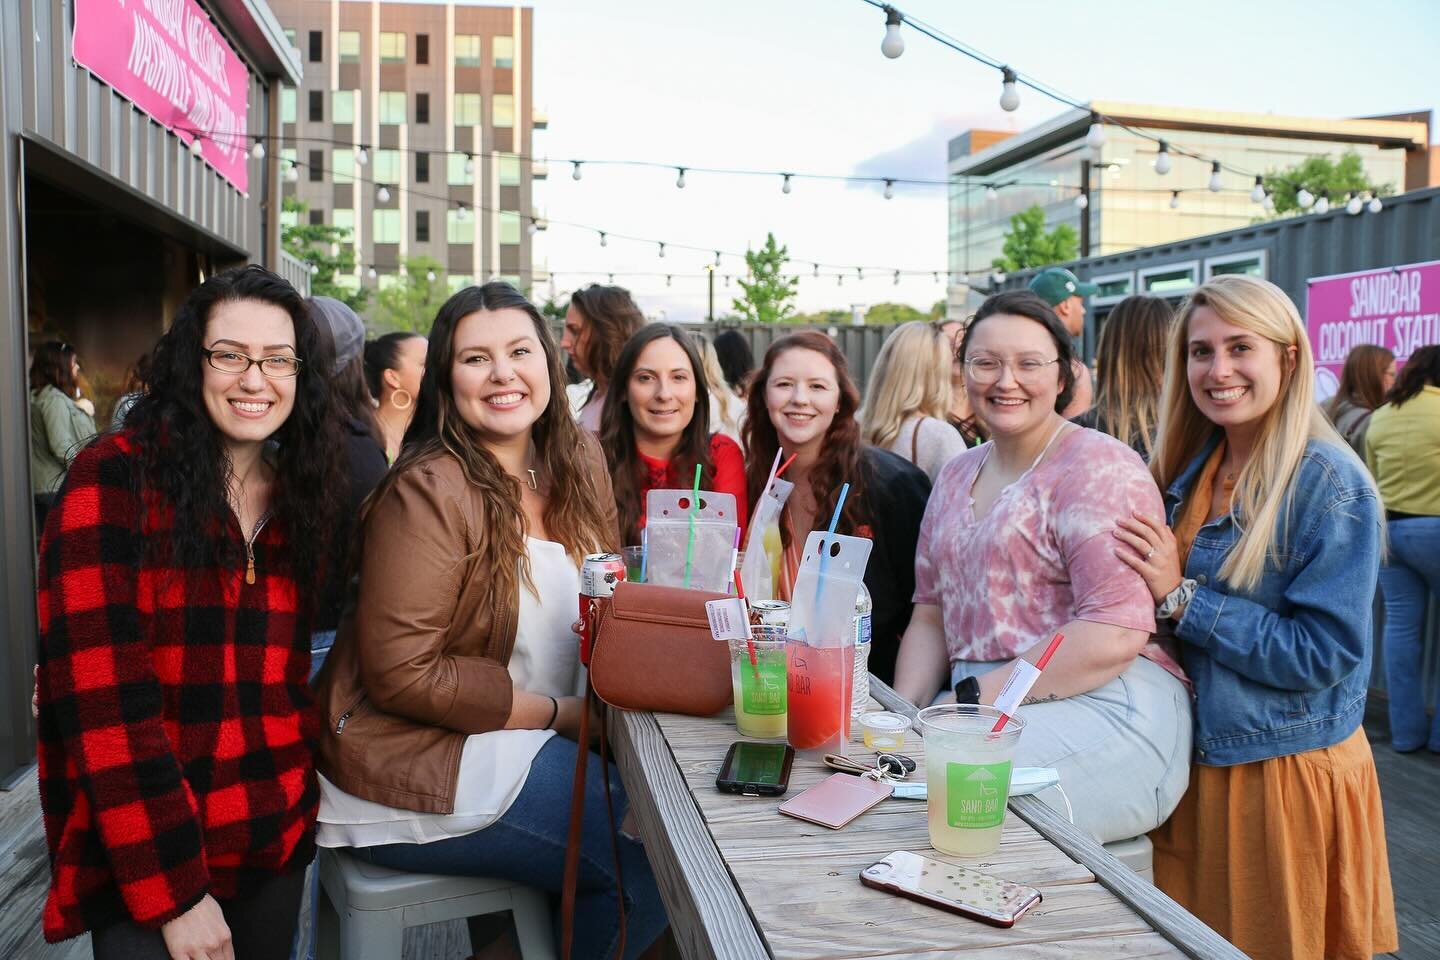 LADIES! Tomorrow it&rsquo;s all about you 🤗 we&rsquo;ve worked extremely hard to make Sandbar a female centered safe atmosphere that&rsquo;s perfect for meetups, blind dates, celebrations, and mental getaways 🏖️ tomorrow we will have our first meet